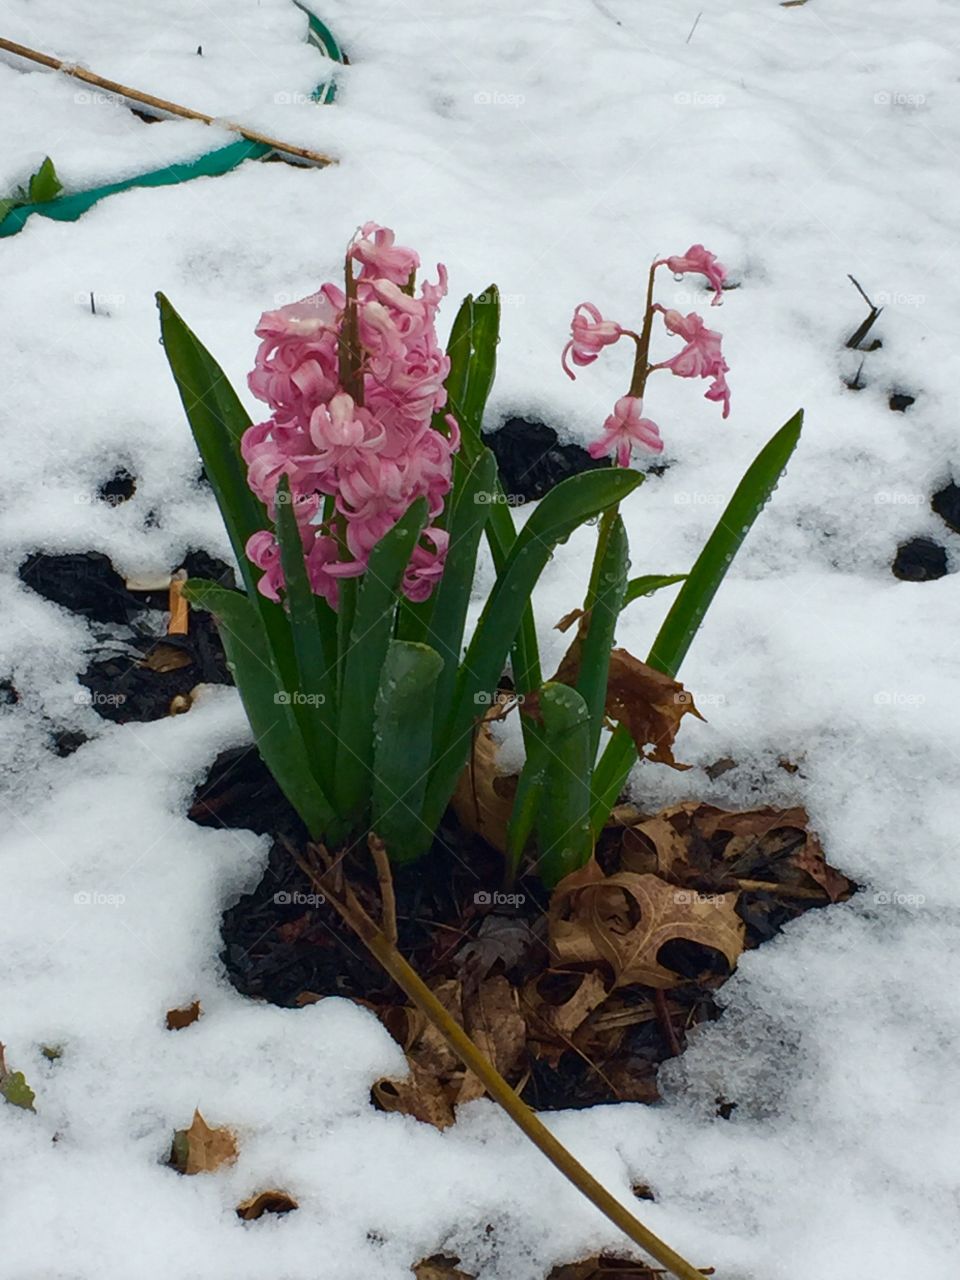 Hyacinth in the snow